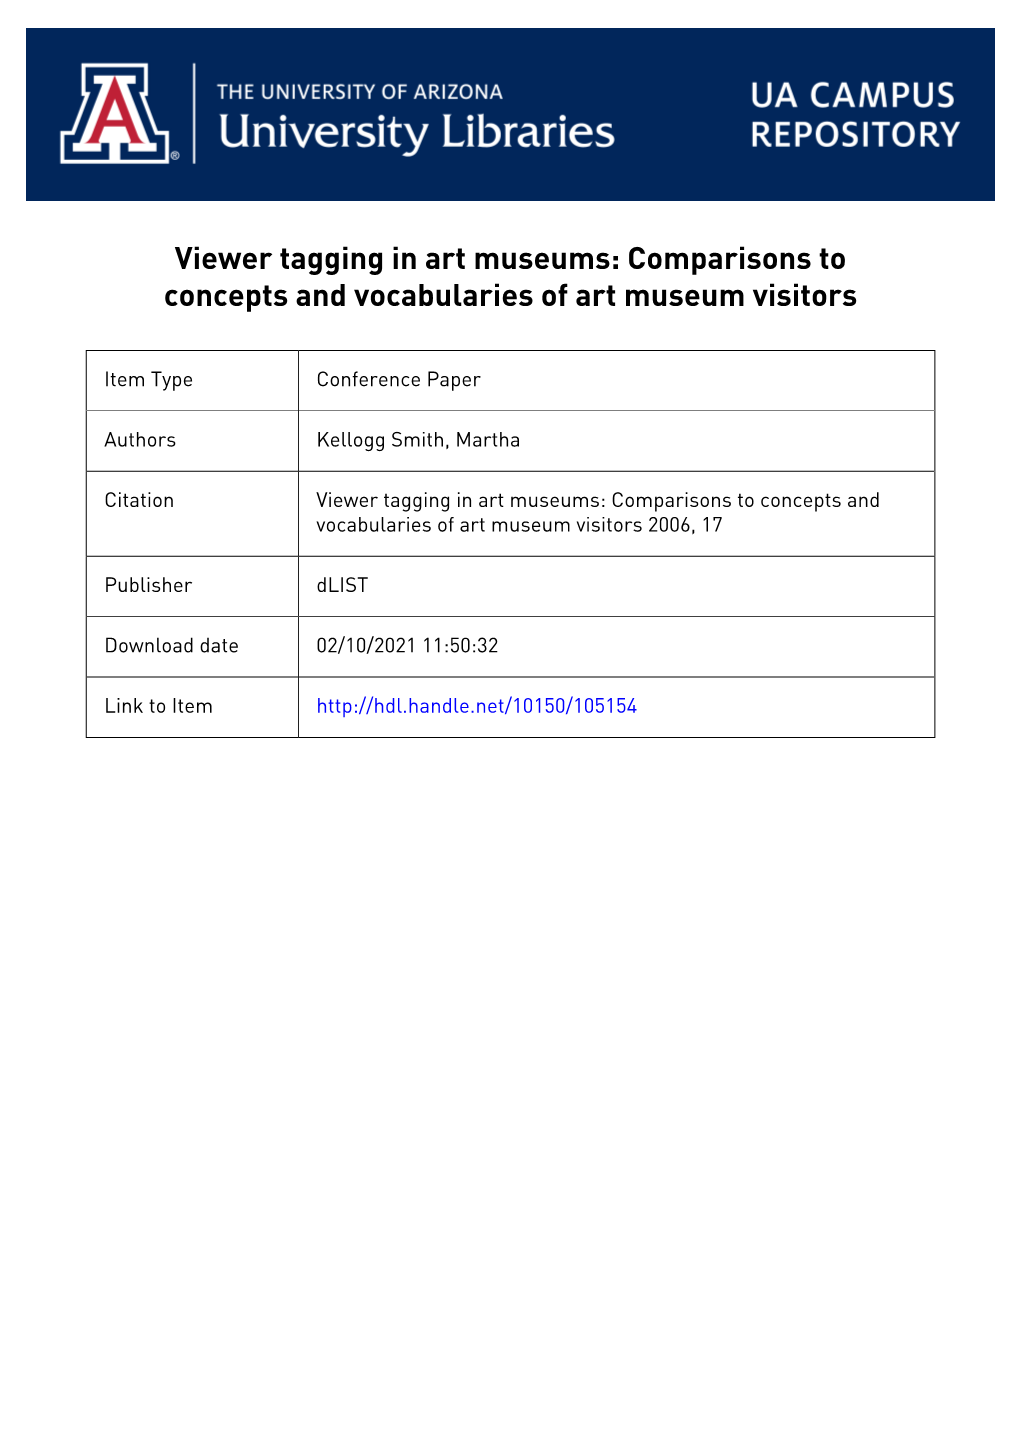 Viewer Tagging in Art Museums: Comparisons to Concepts and Vocabularies of Art Museum Visitors